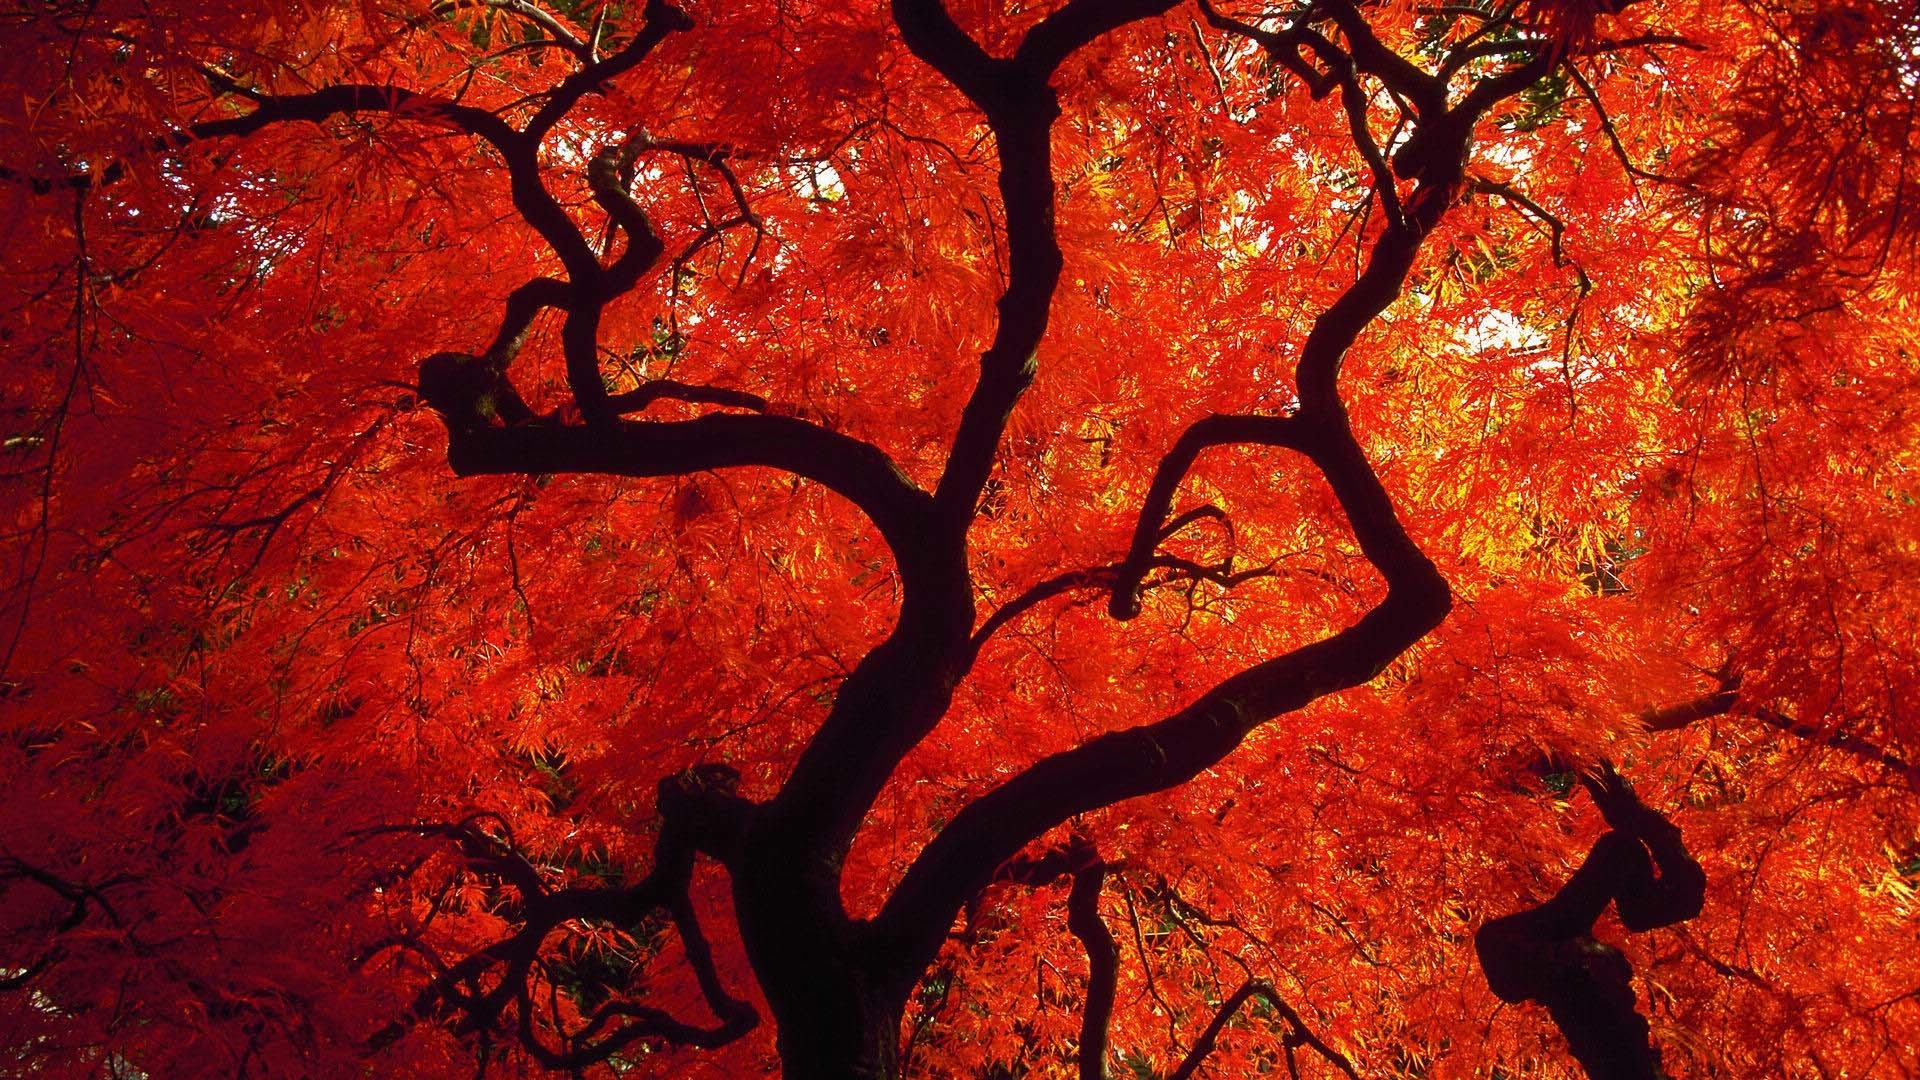 Free Red Tree wallpapers and Red Tree backgrounds for your computer desktop. Find Red Tree pictures and Red Tree photos on Desktop Nexus